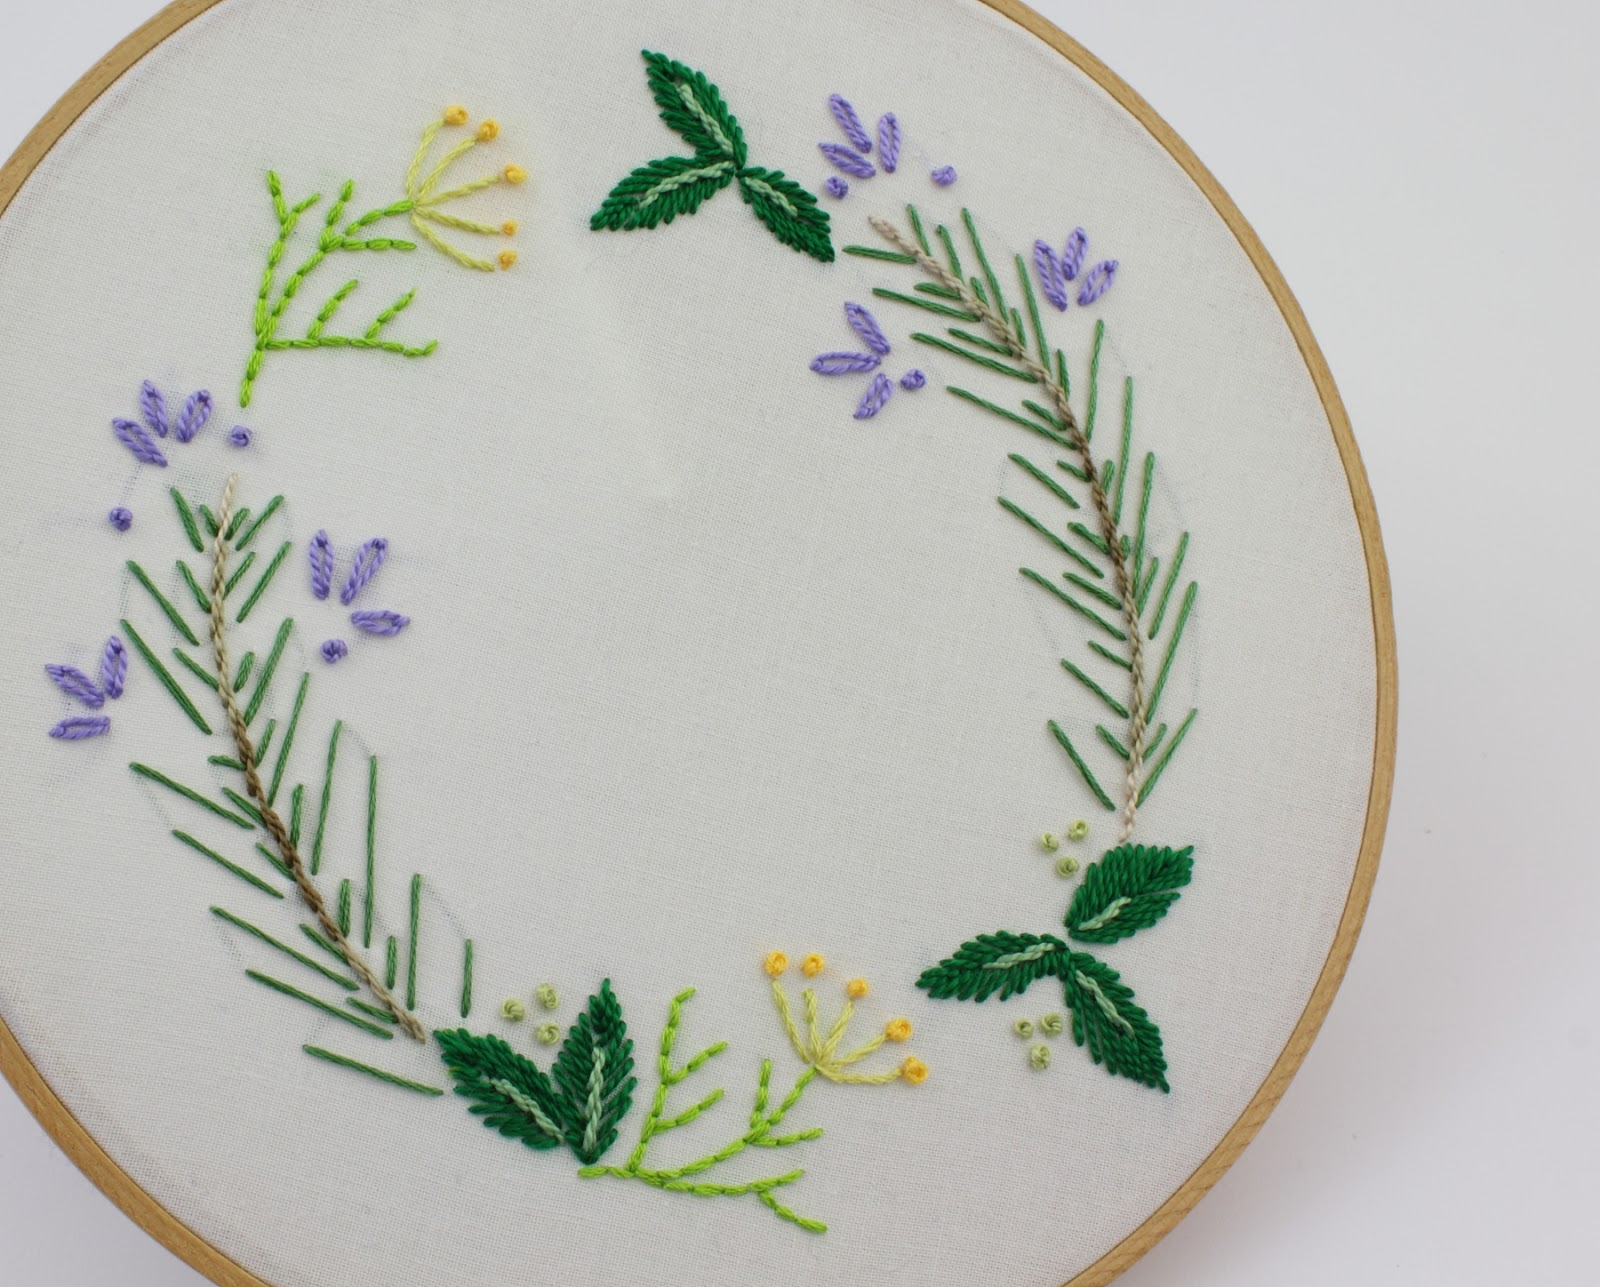 Herb Embroidery Patterns Big B Herb Wreath Embroidery